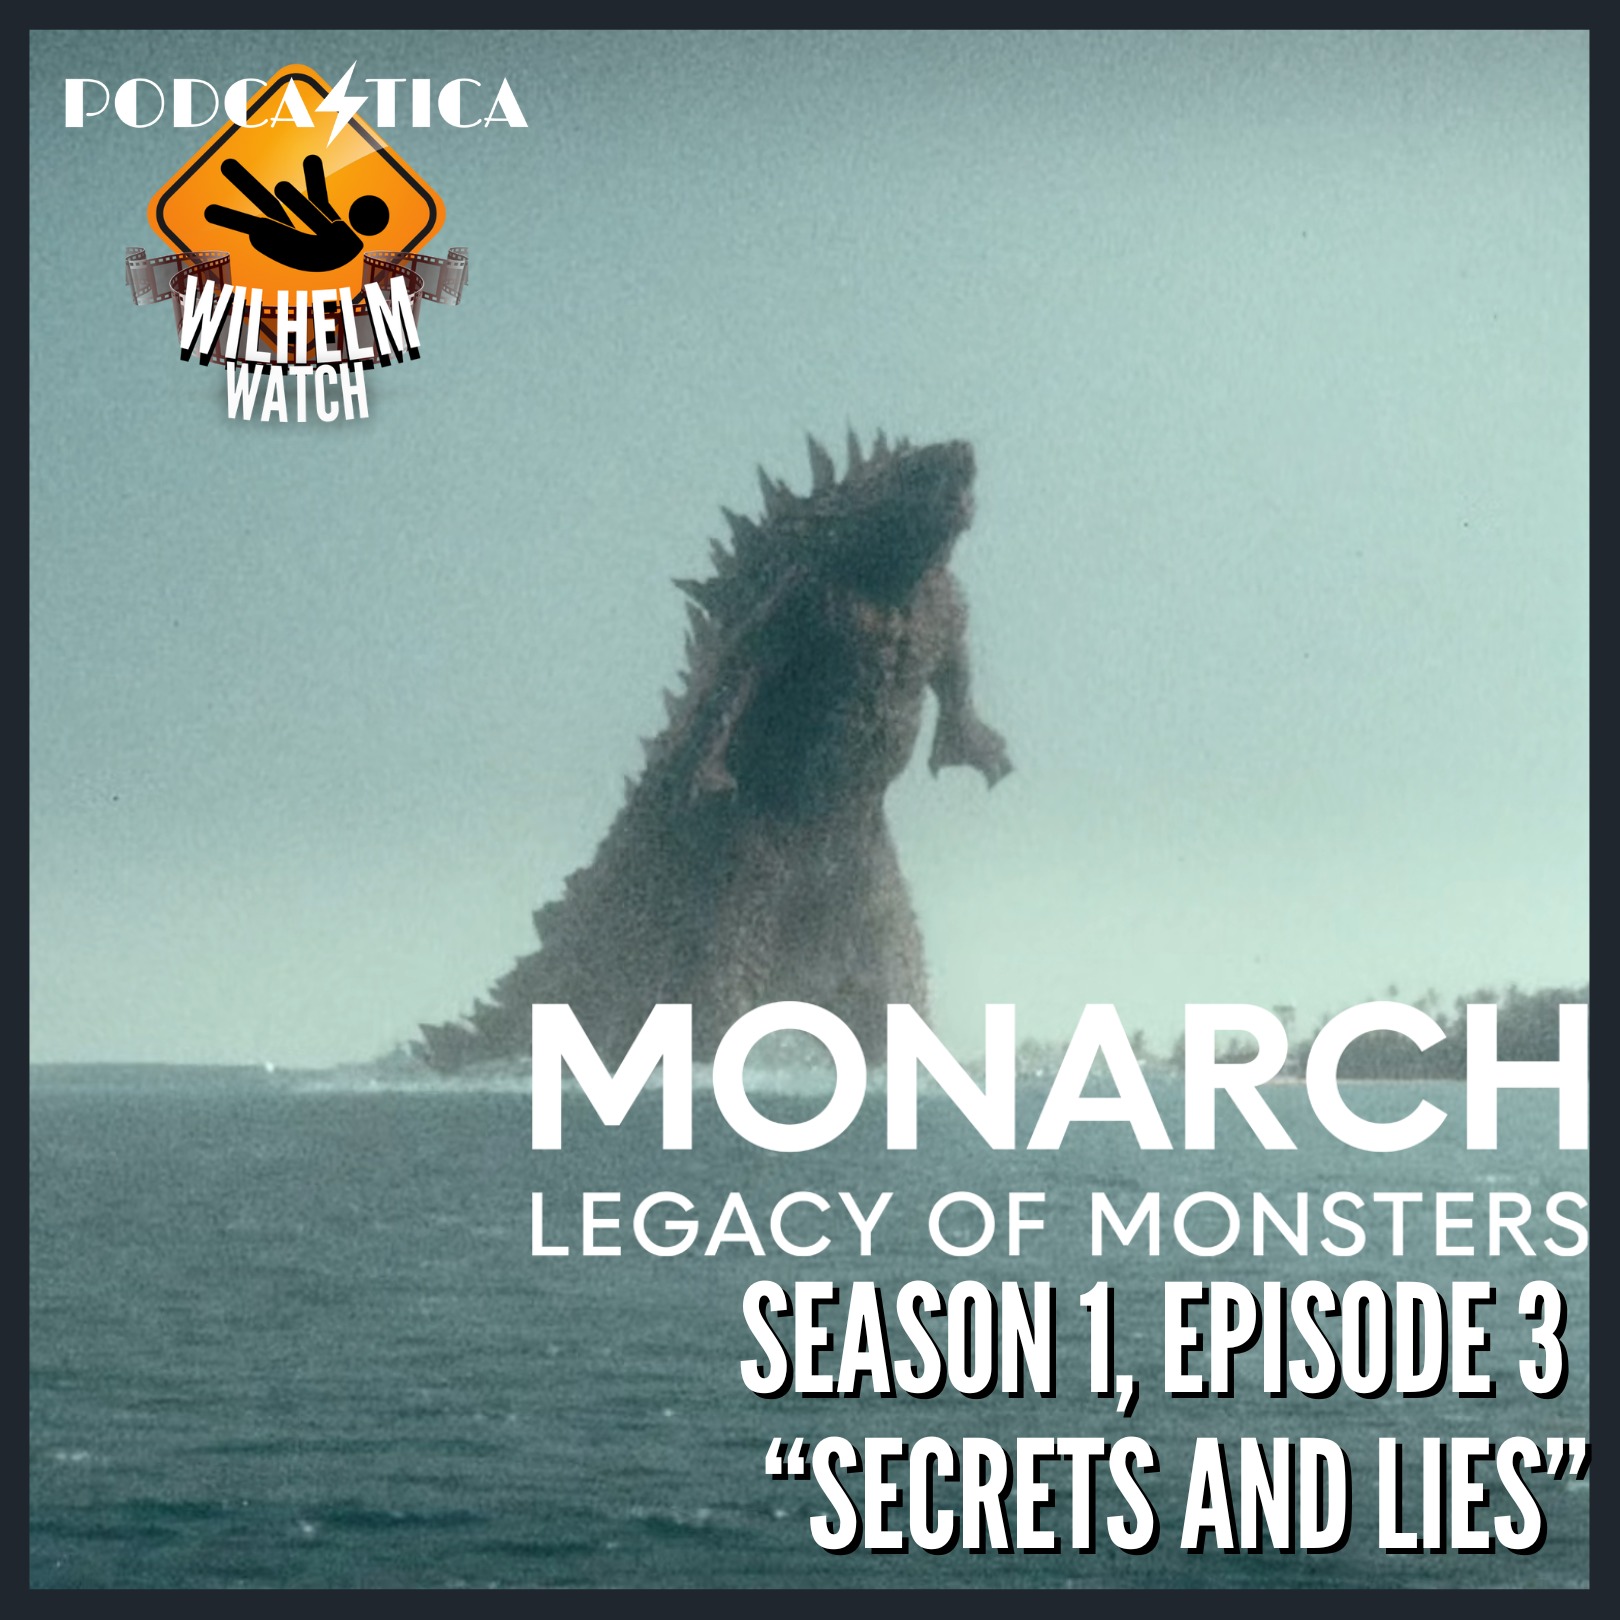 WILHELM WATCH / HOUSE PODCASTICA - Monarch: Legacy of Monsters S01E03 